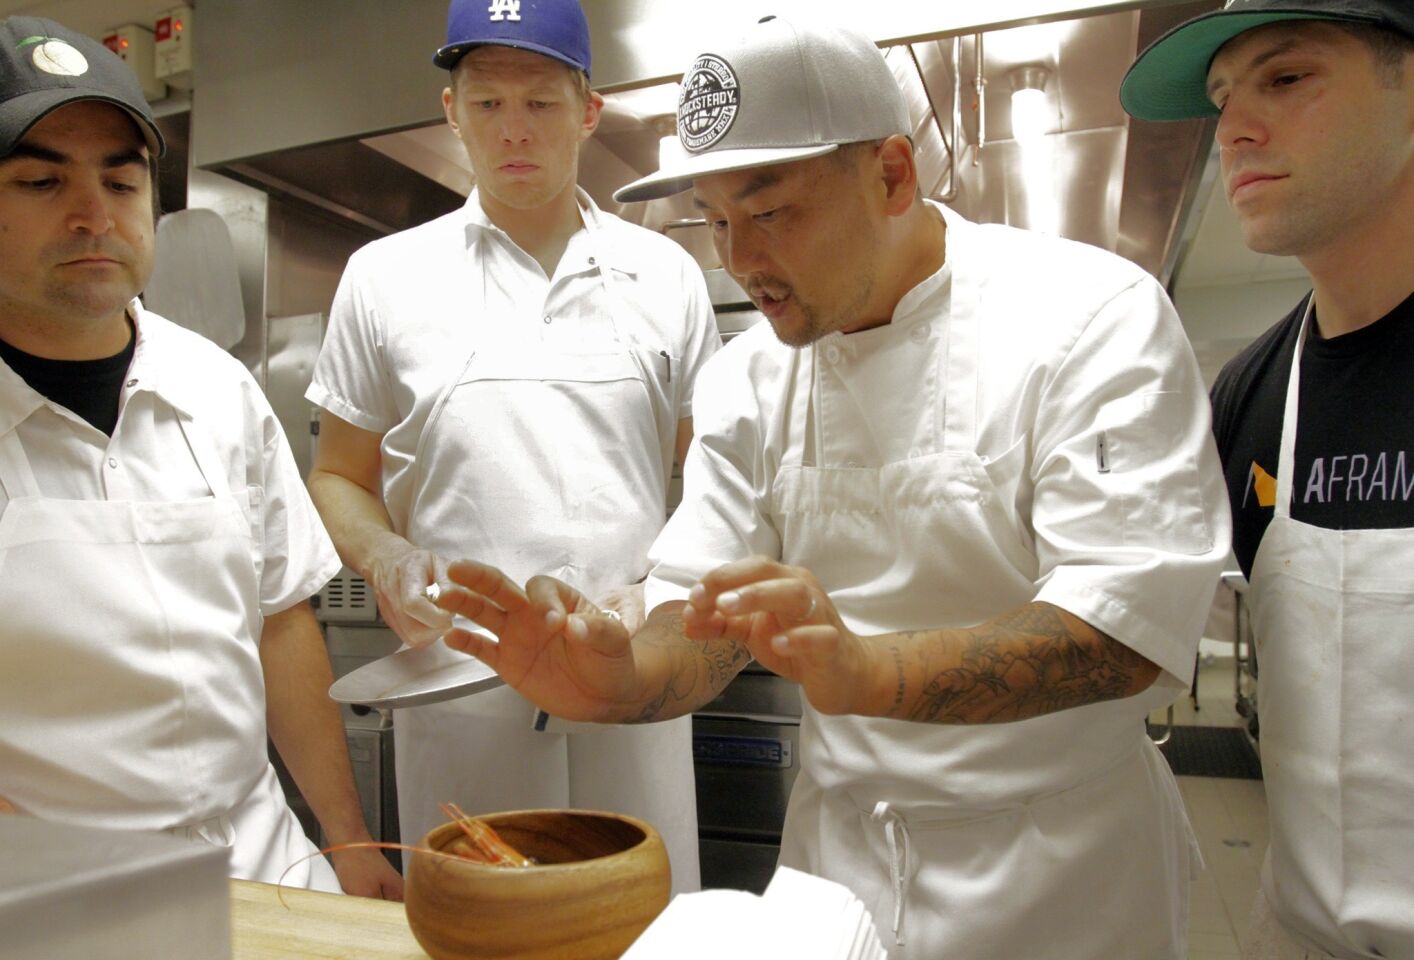 Chef Roy Choi instructs his staff in the kitchen.